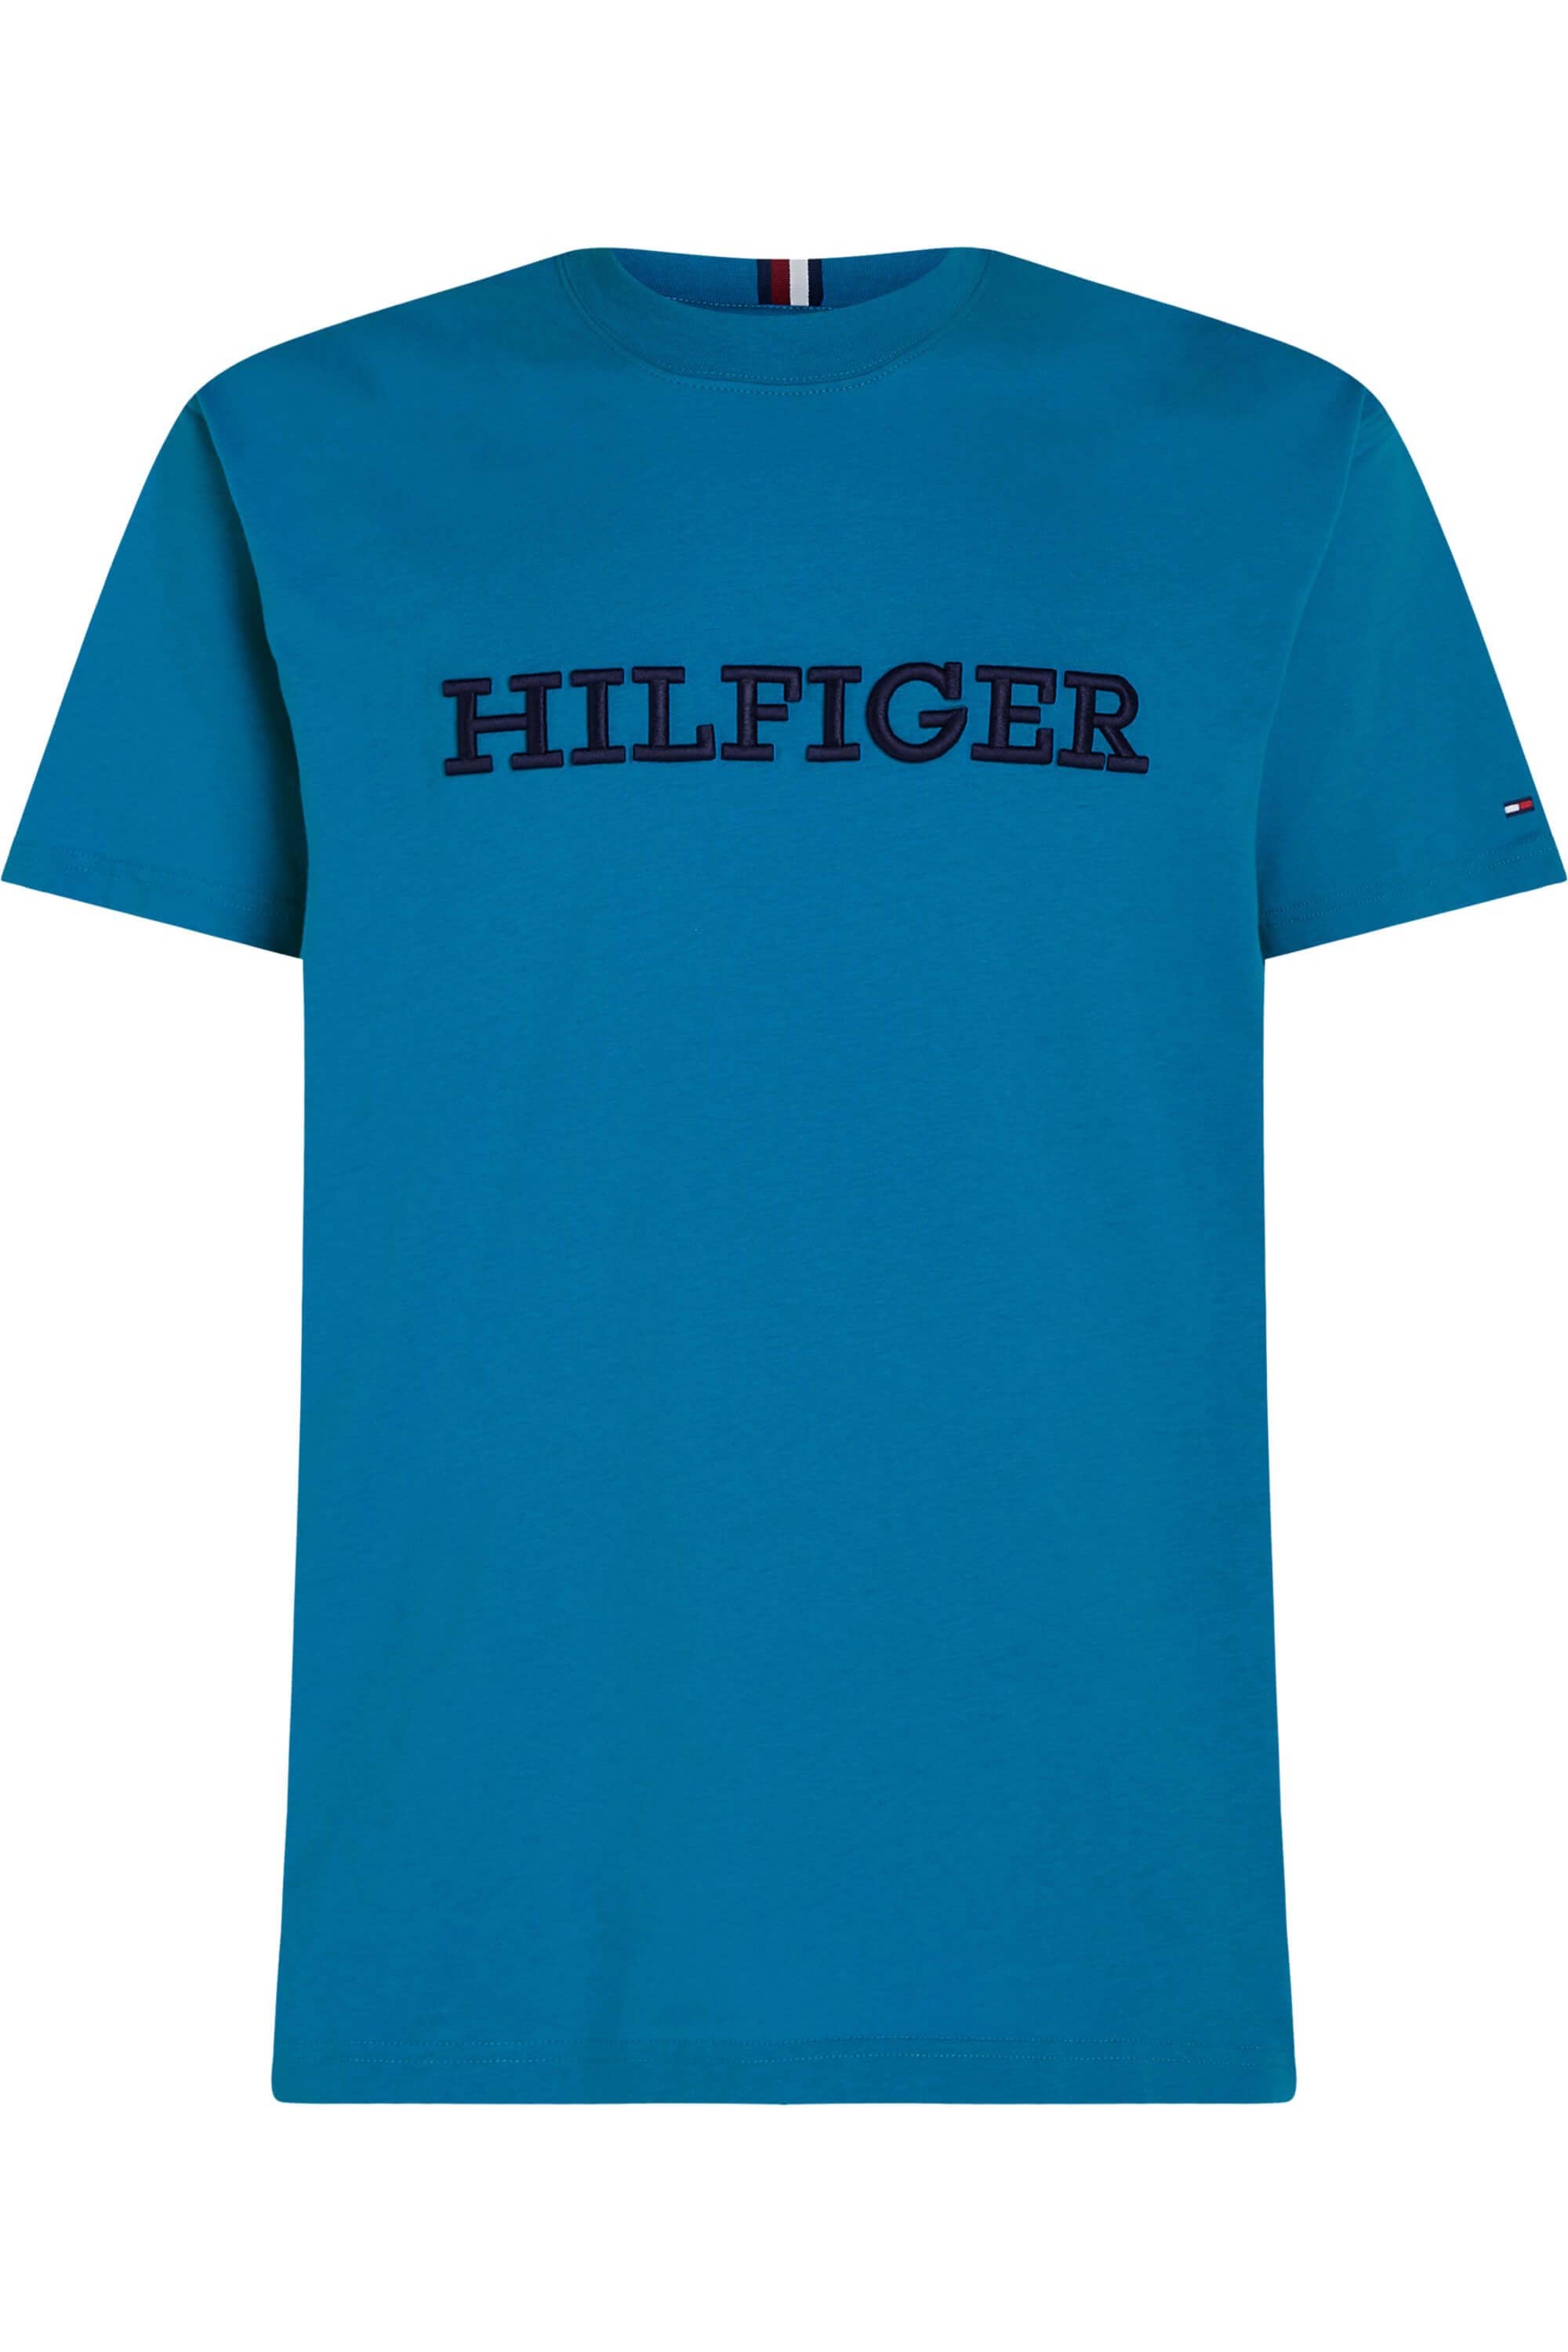 Aqua Tommy Monotype T-Shirt Hilfiger Embroidered